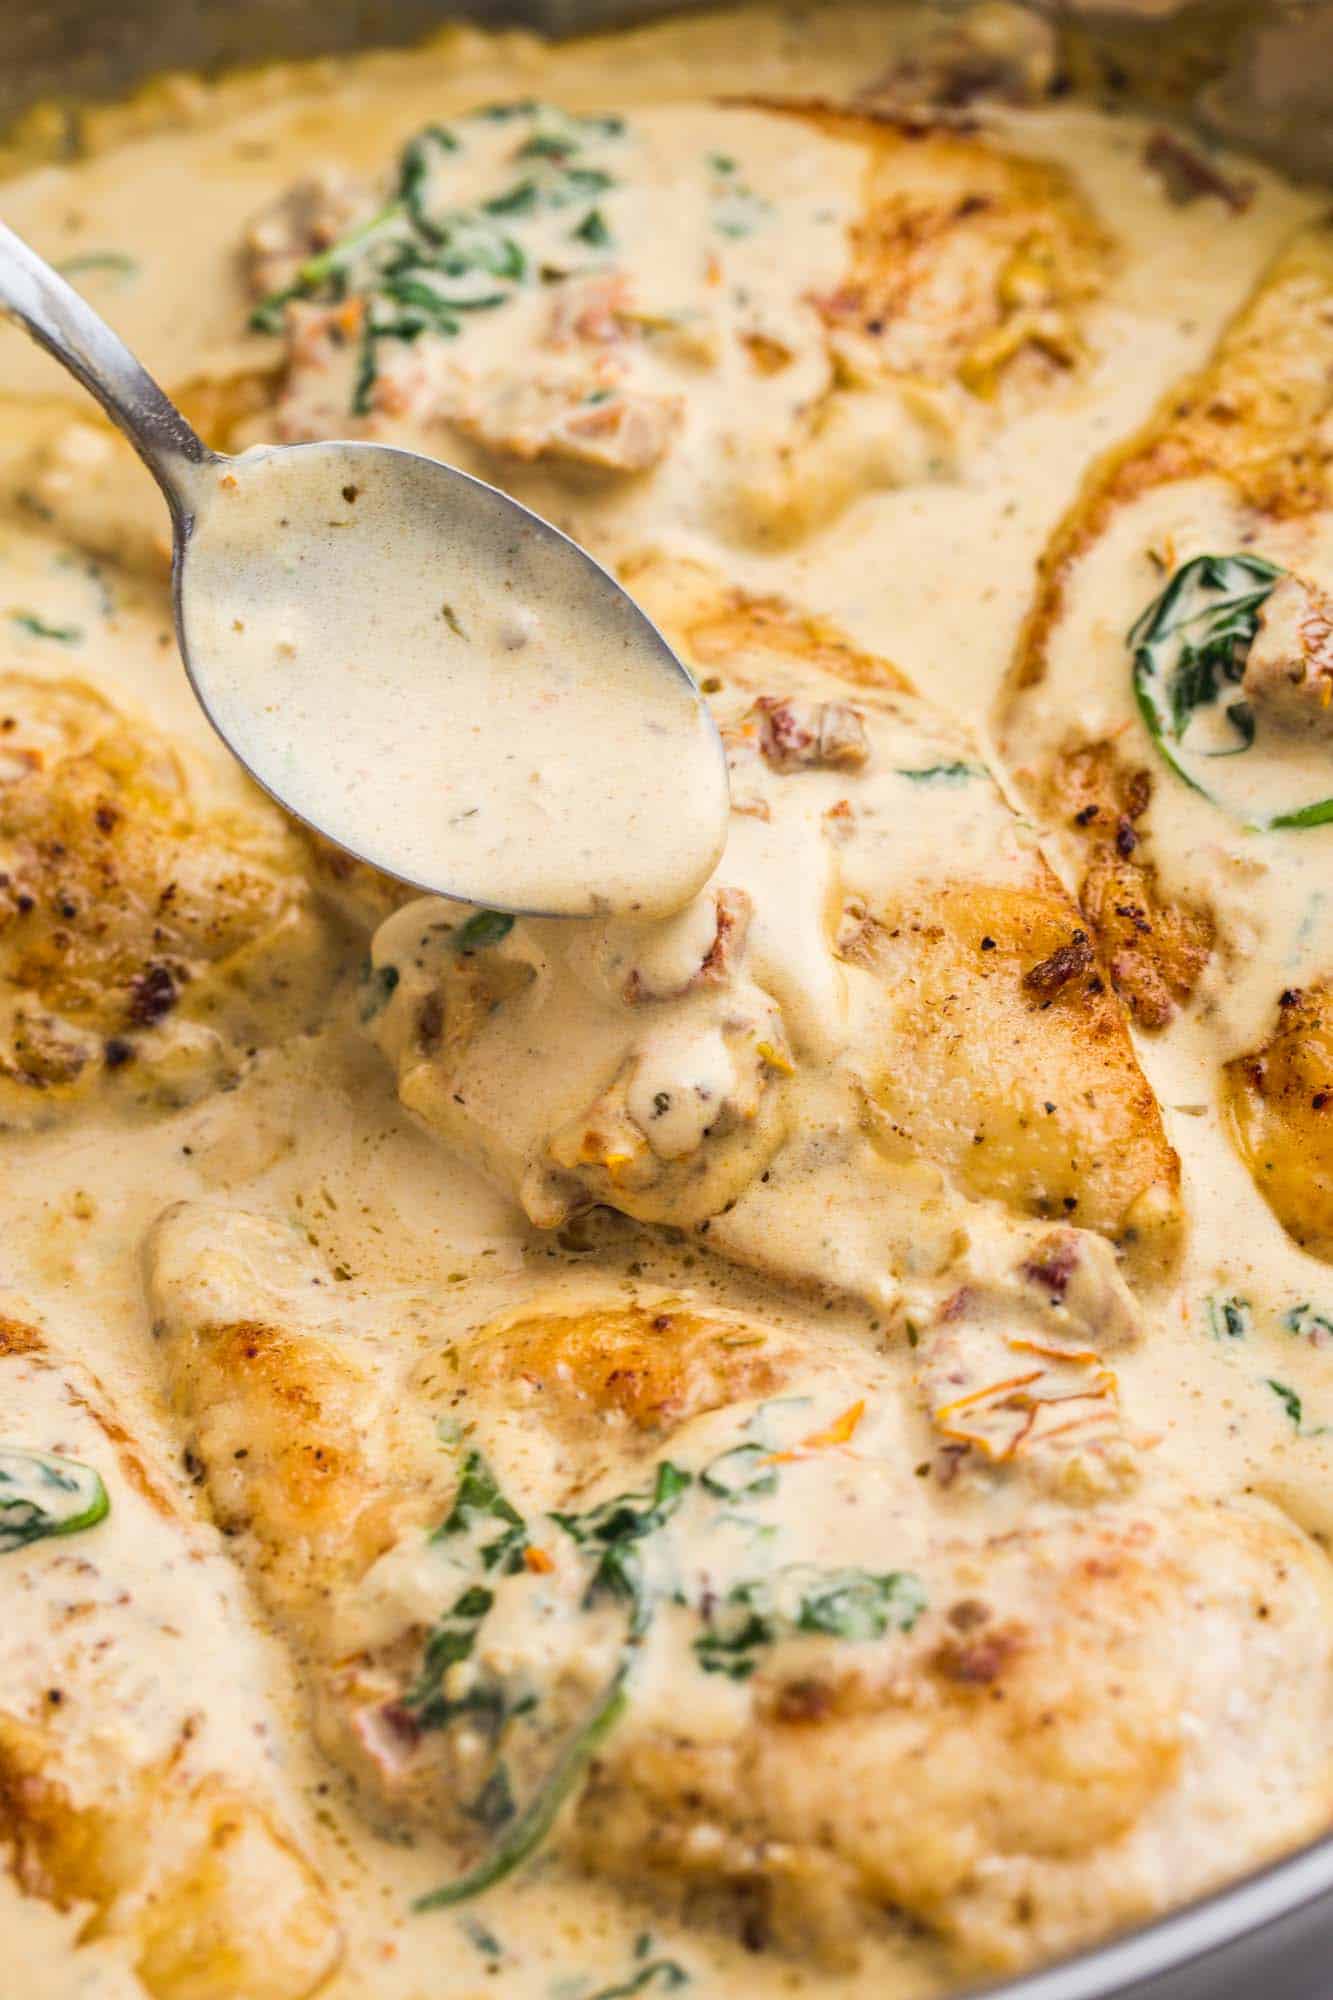 Drizzling cream sauce over chicken in the pan